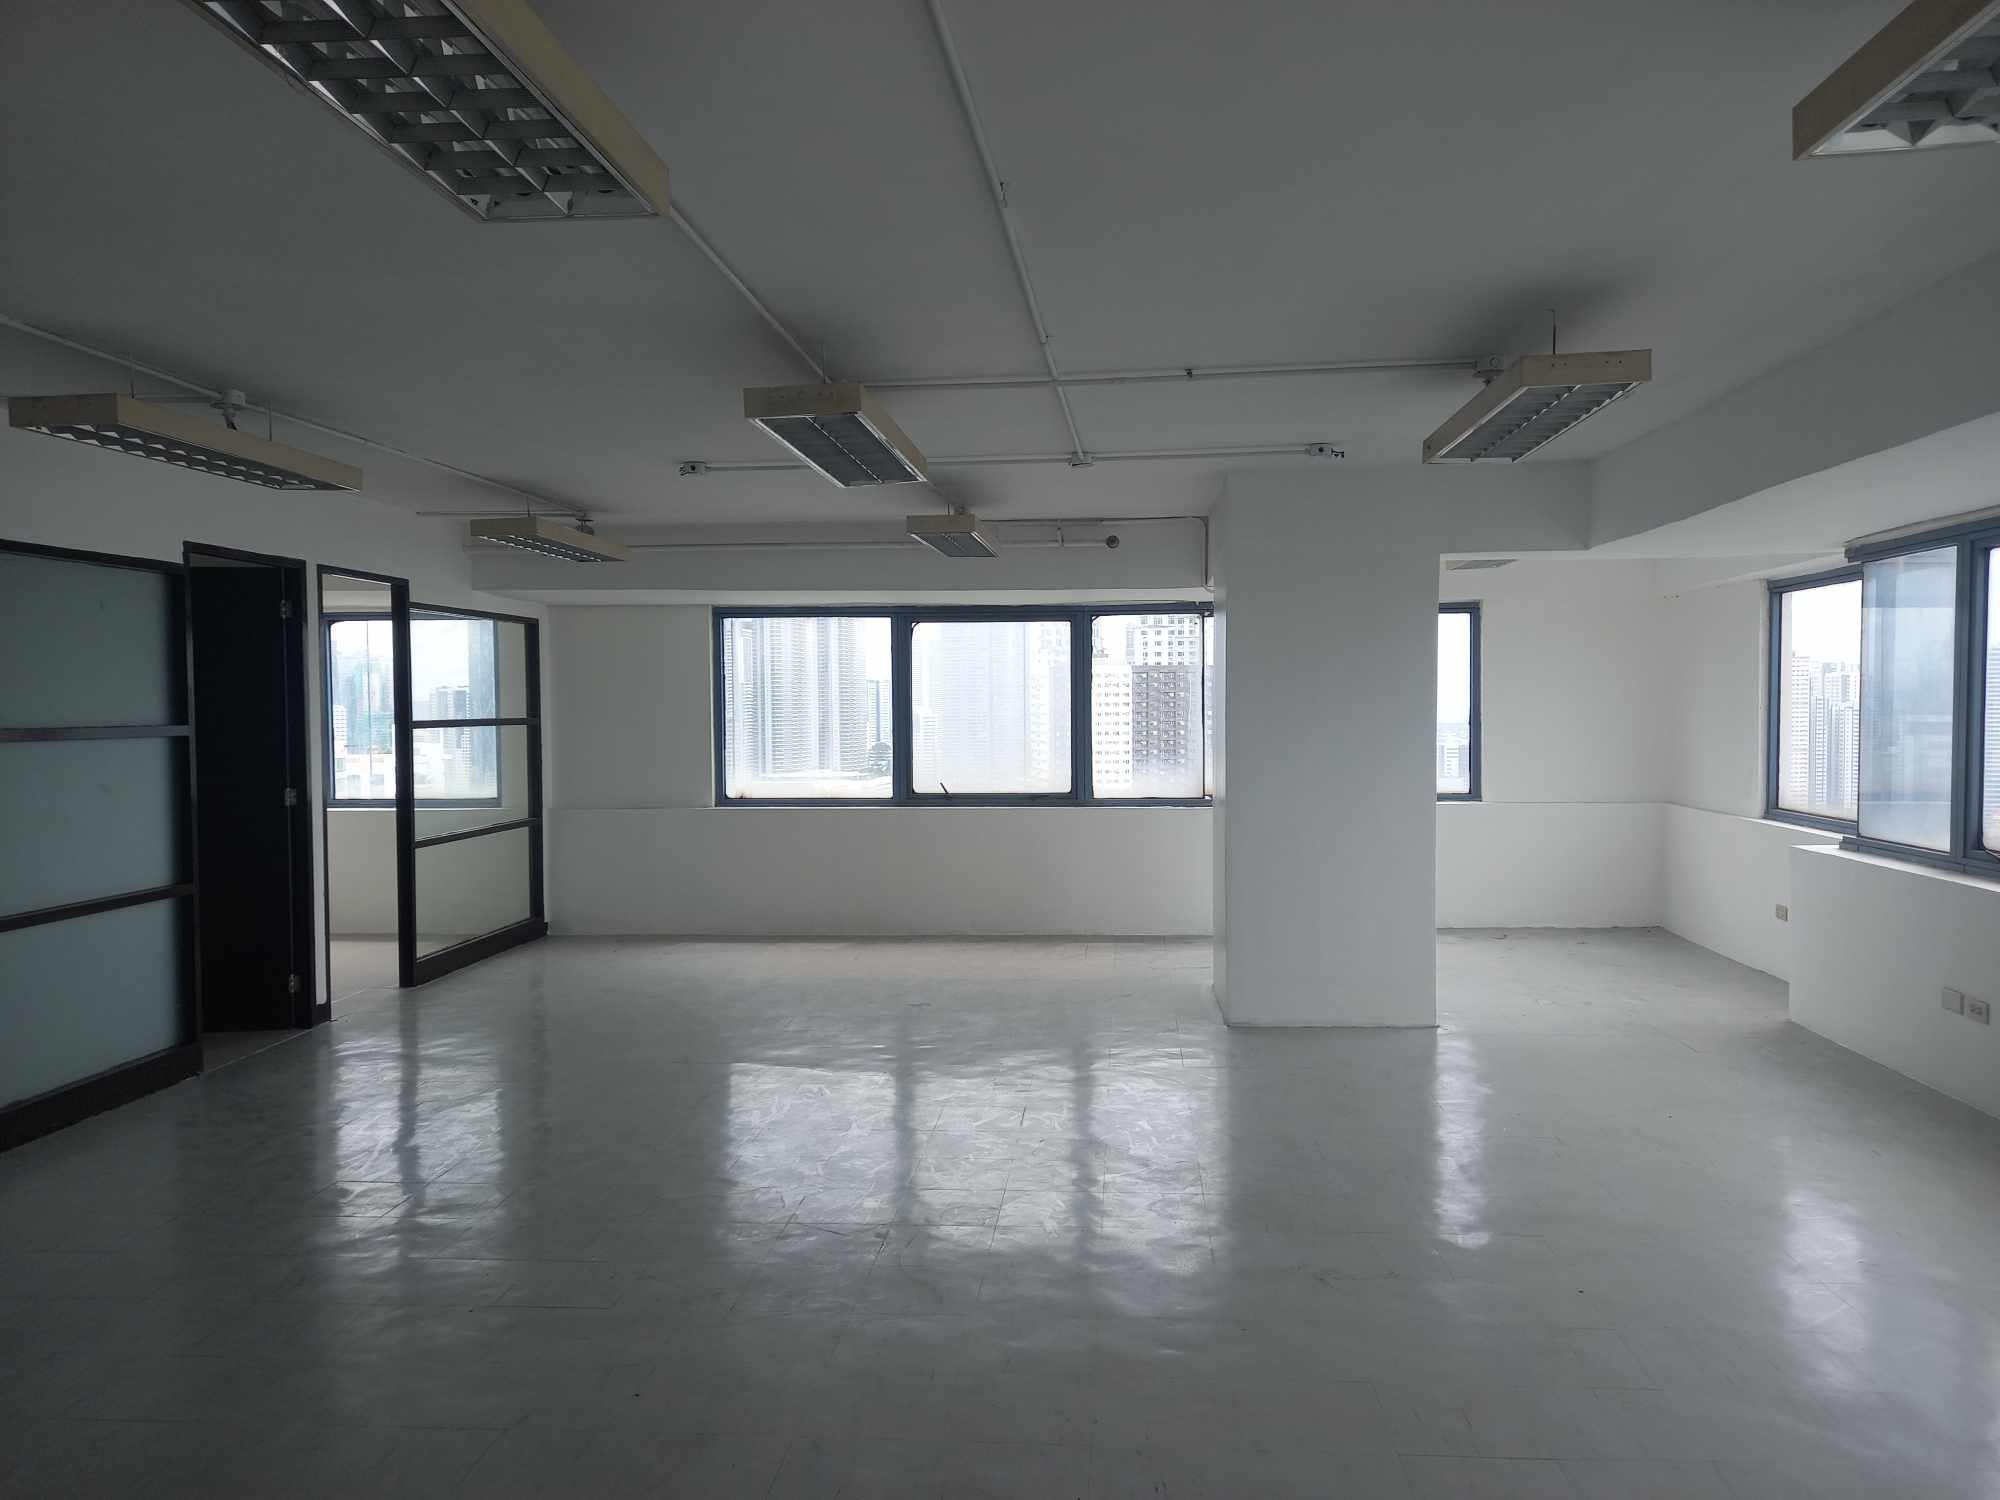 For Rent Lease Office Space Shaw Mandaluyong City 156 sqm